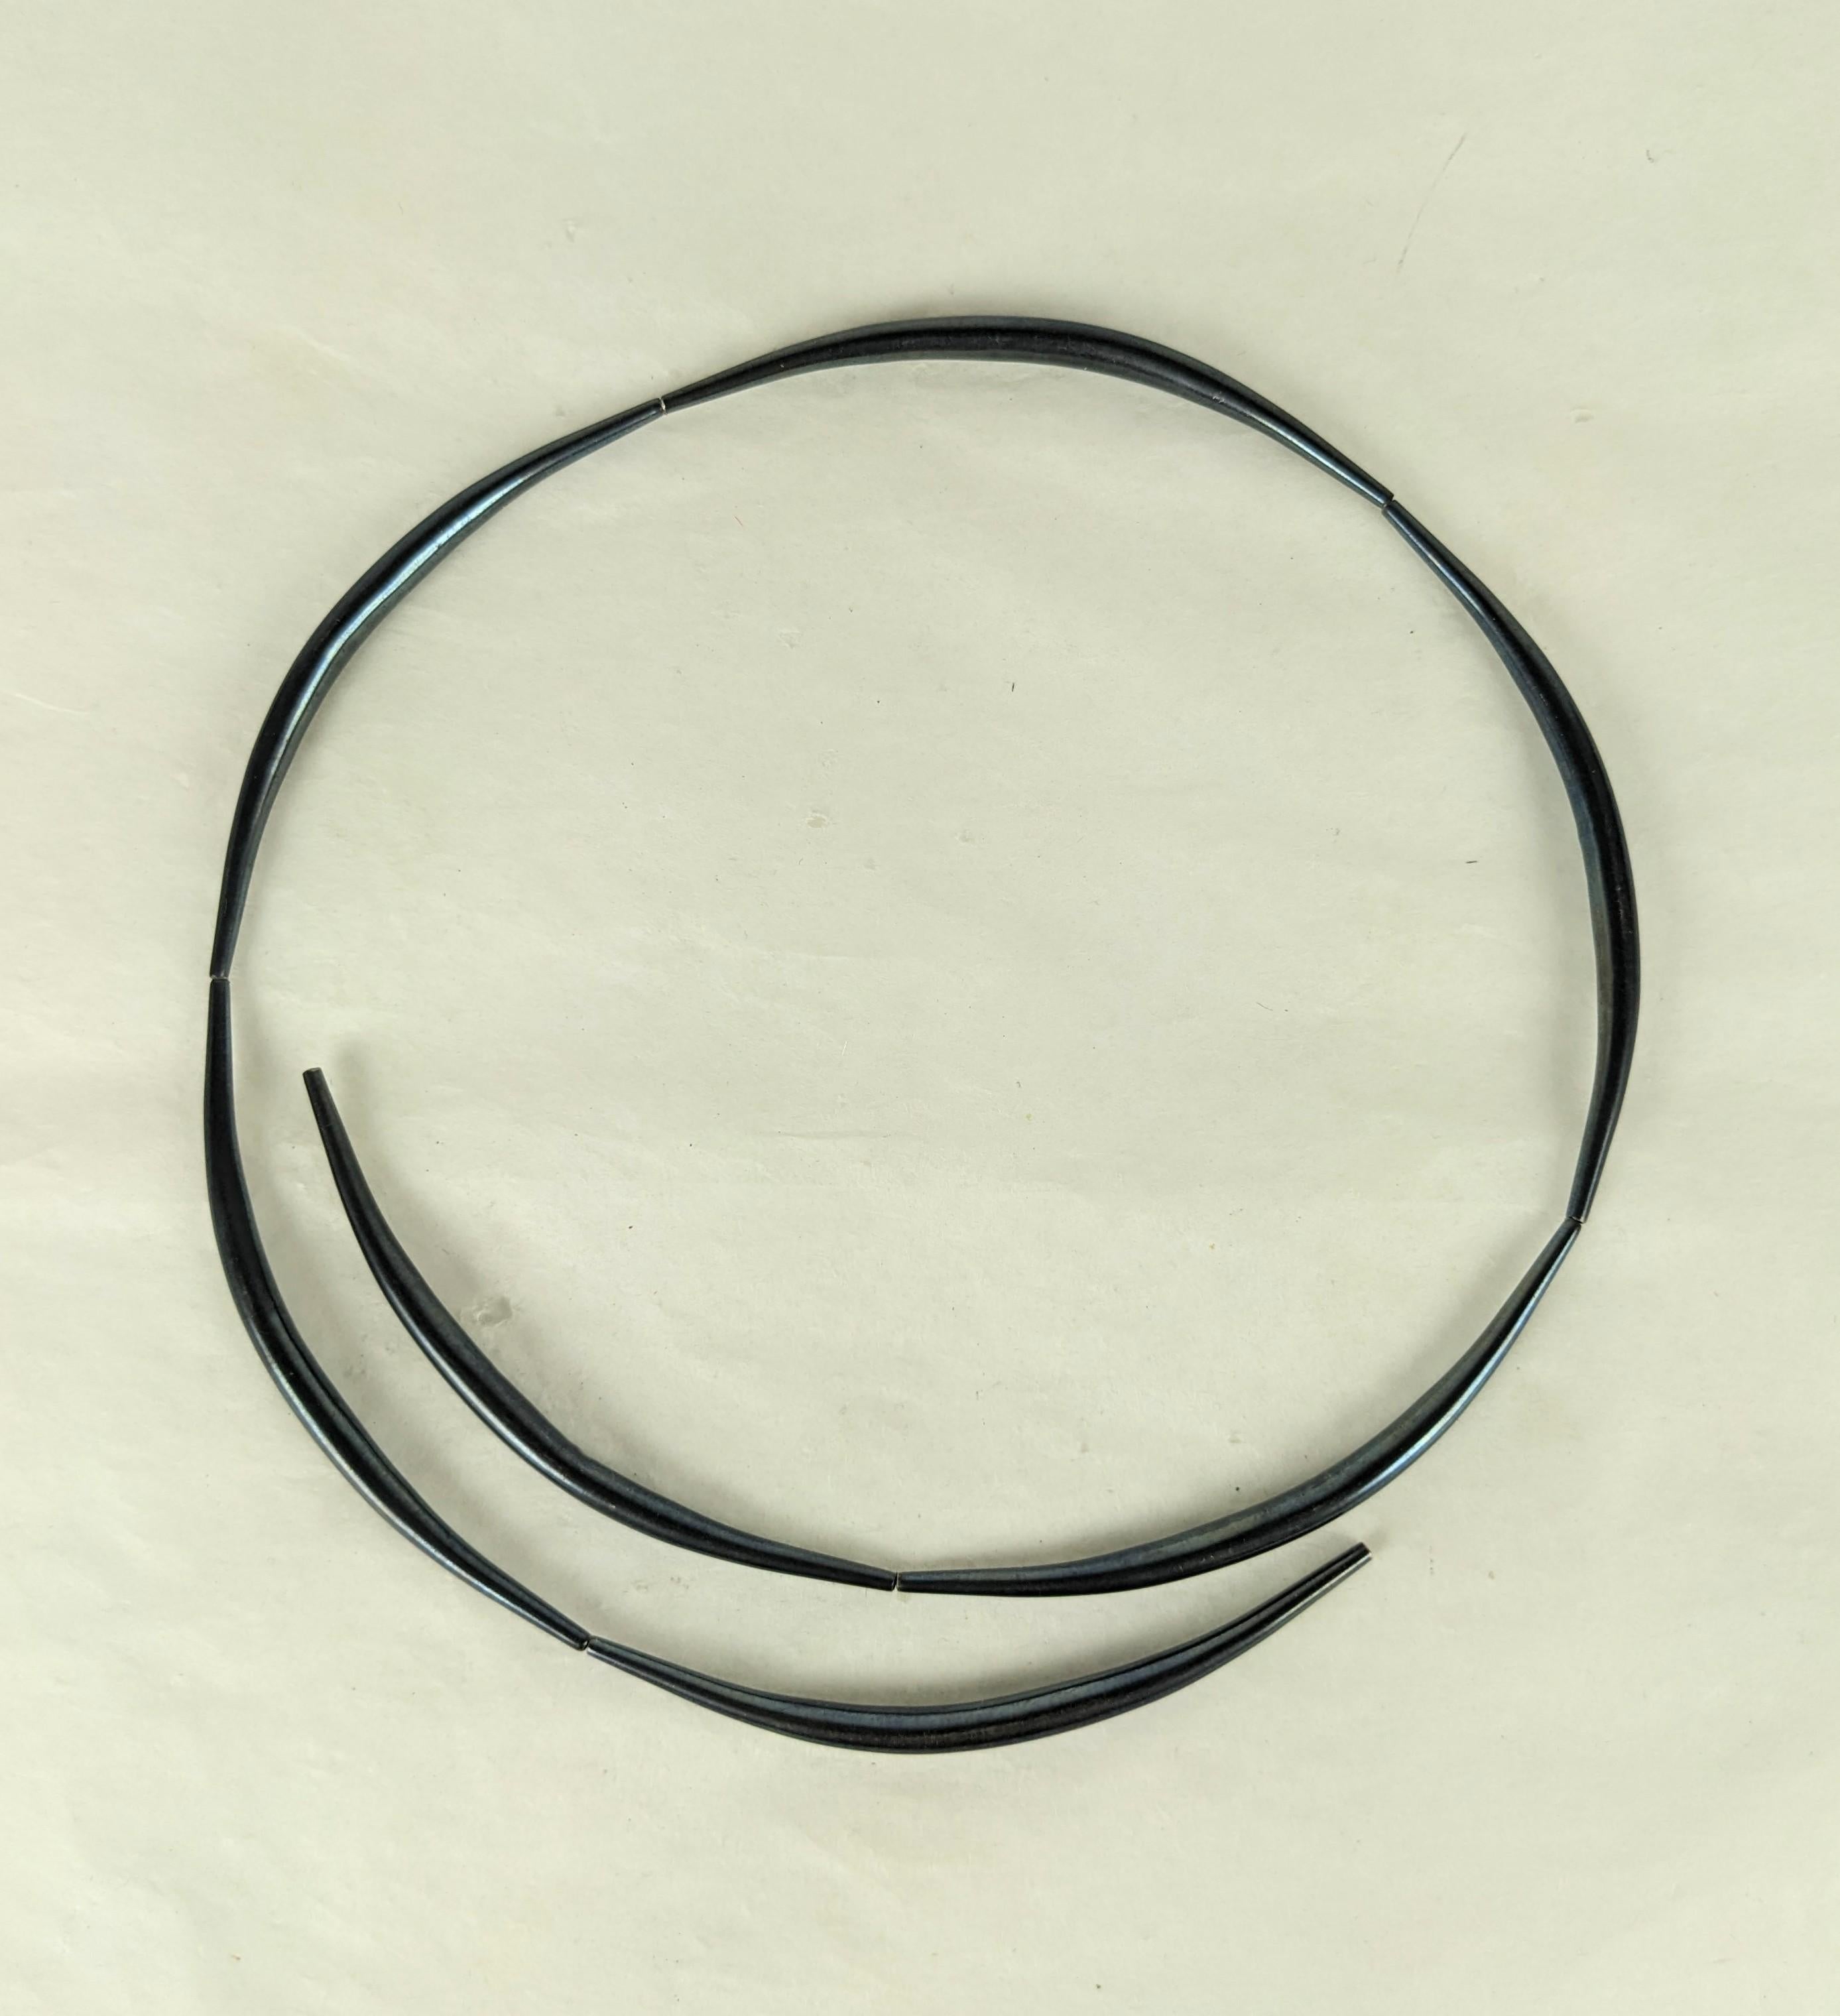 Art Wear Patinaed Coil Spring Necklace from the 1990's. Attributed to Ted Muehling of Art Wear Gallery. Gently lobed blackened segments are strung on a spring coil and create a striking minimalist effect when worn. 4.25